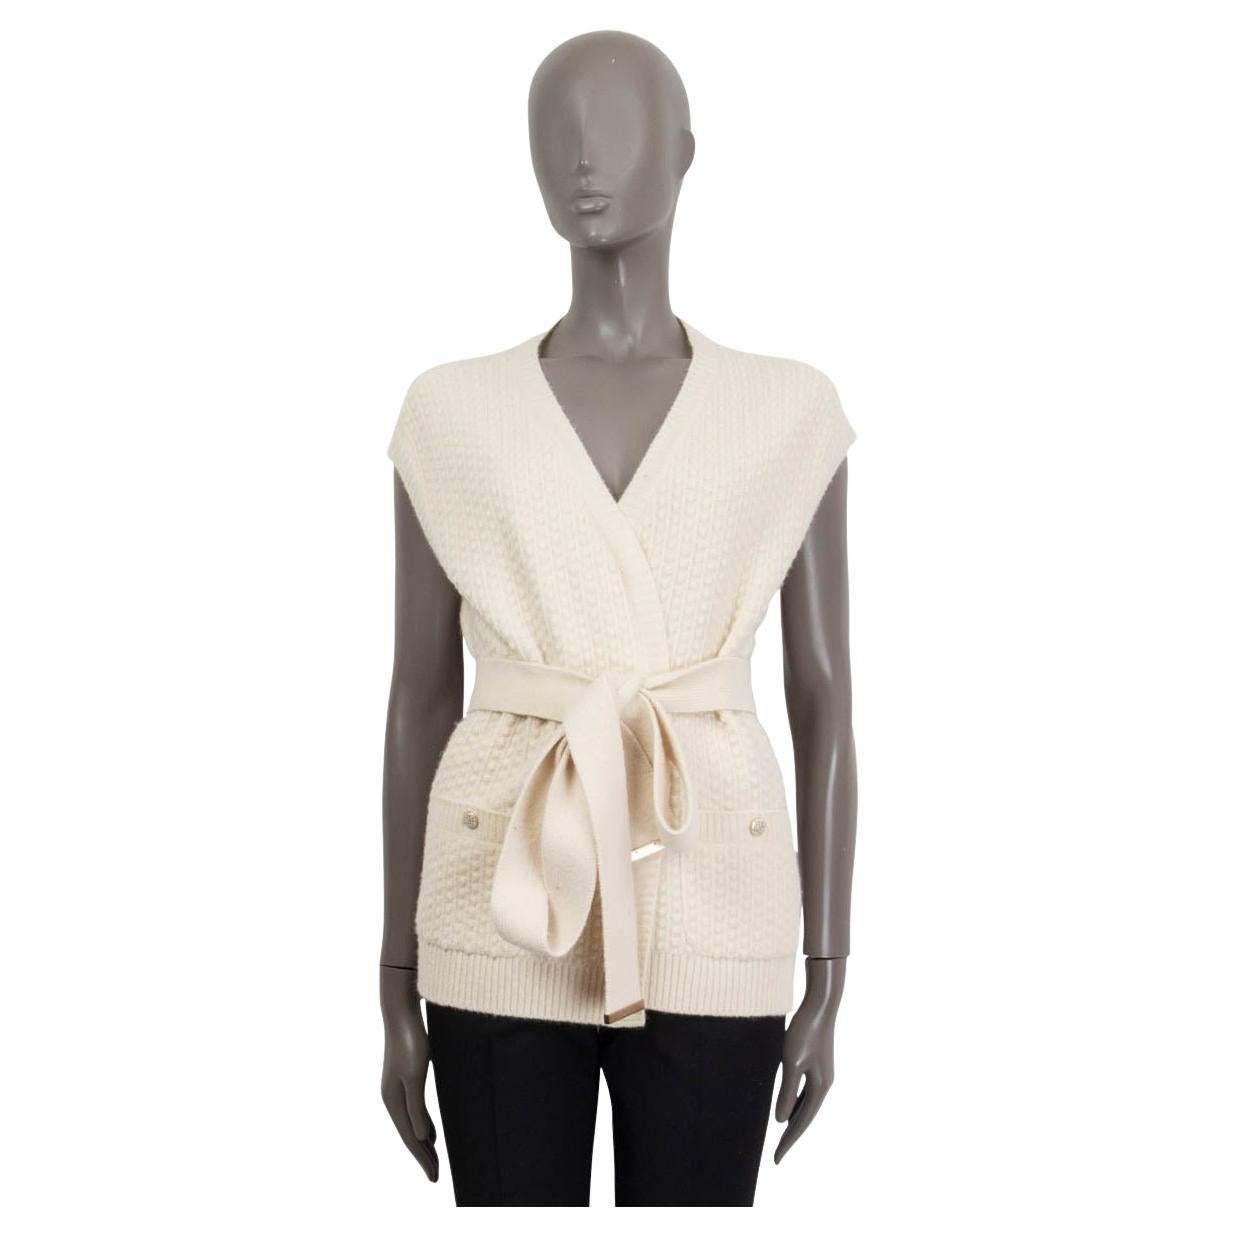 CHANEL ivory cashmere 2018 BELTED SLEEVELESS Knit Cardigan Sweater 40 M For Sale